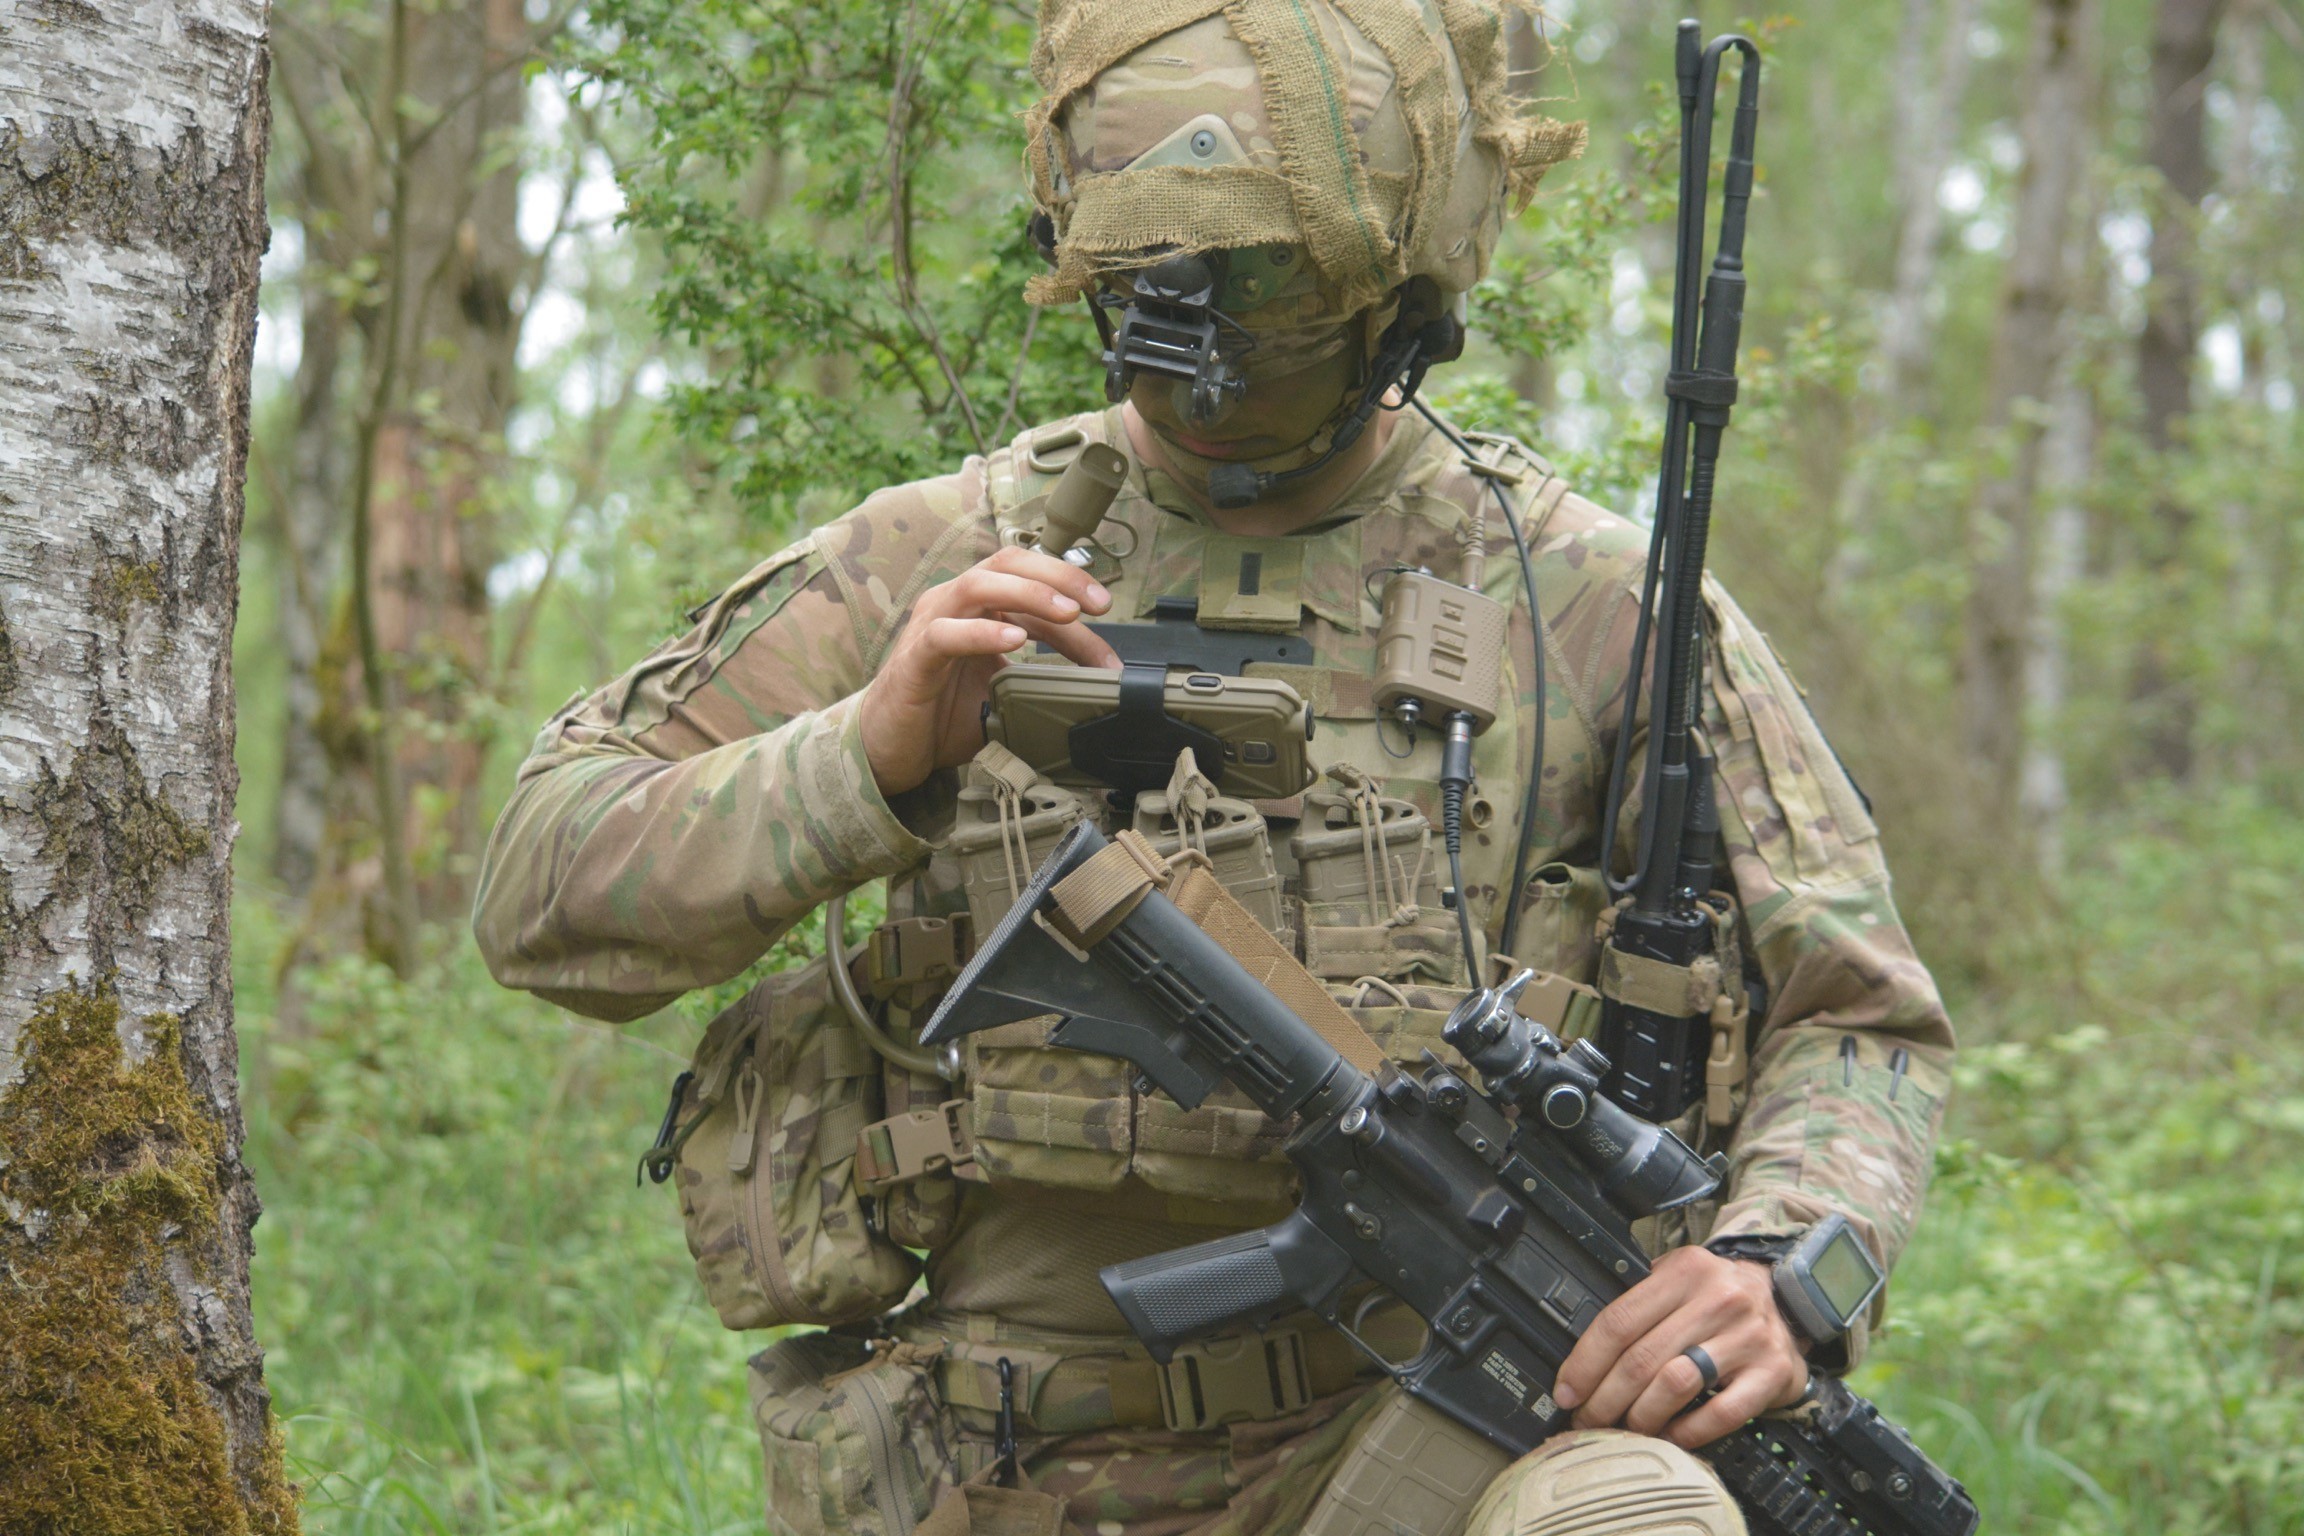 A soldier of the 173rd Airborne Brigade uses the End User Device to report information to his company commander through the Integrated Tactical Network during an exercise in Germany during 2018. (DVIDS)